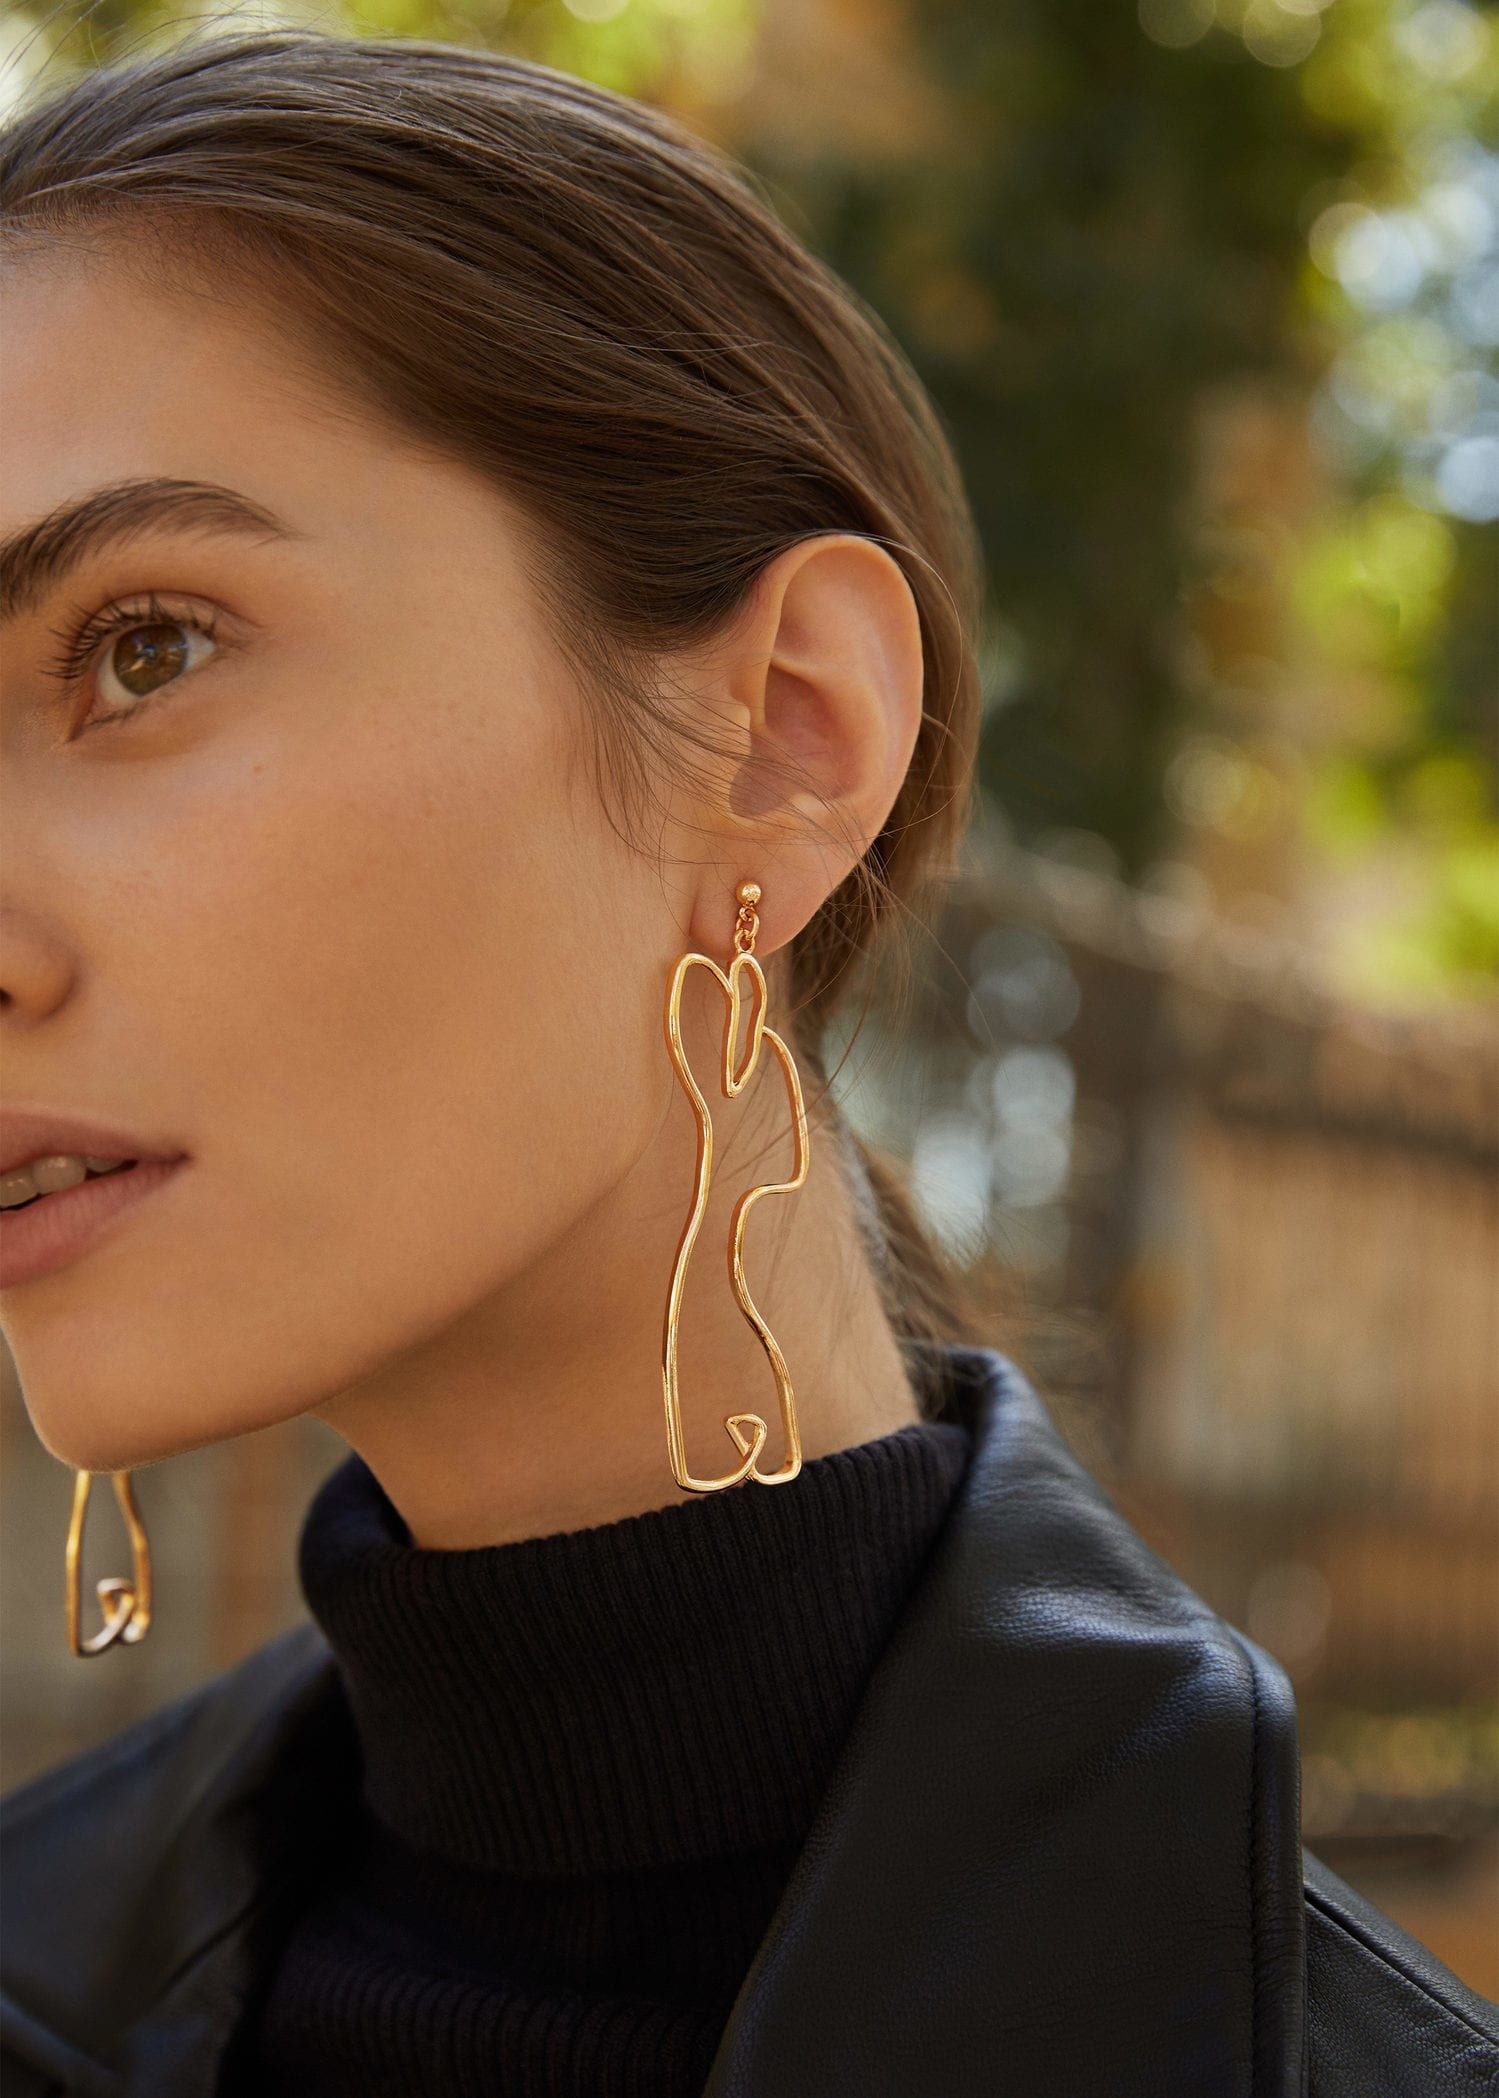 35 Affordable Pieces Of Jewelry That Look Like A Million Bucks